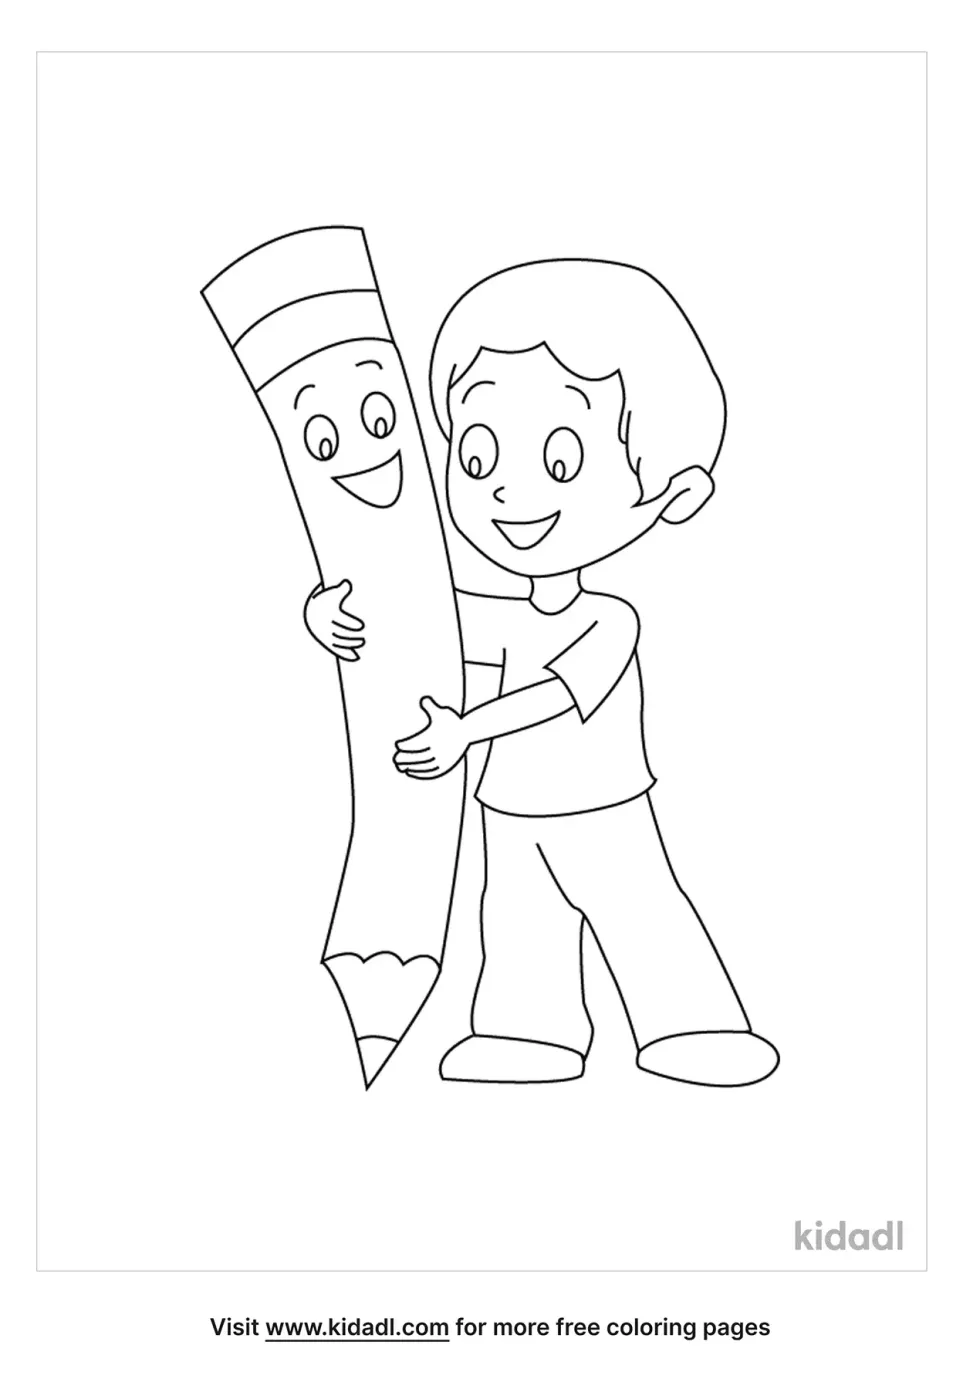 Boy And Pencil Coloring Page